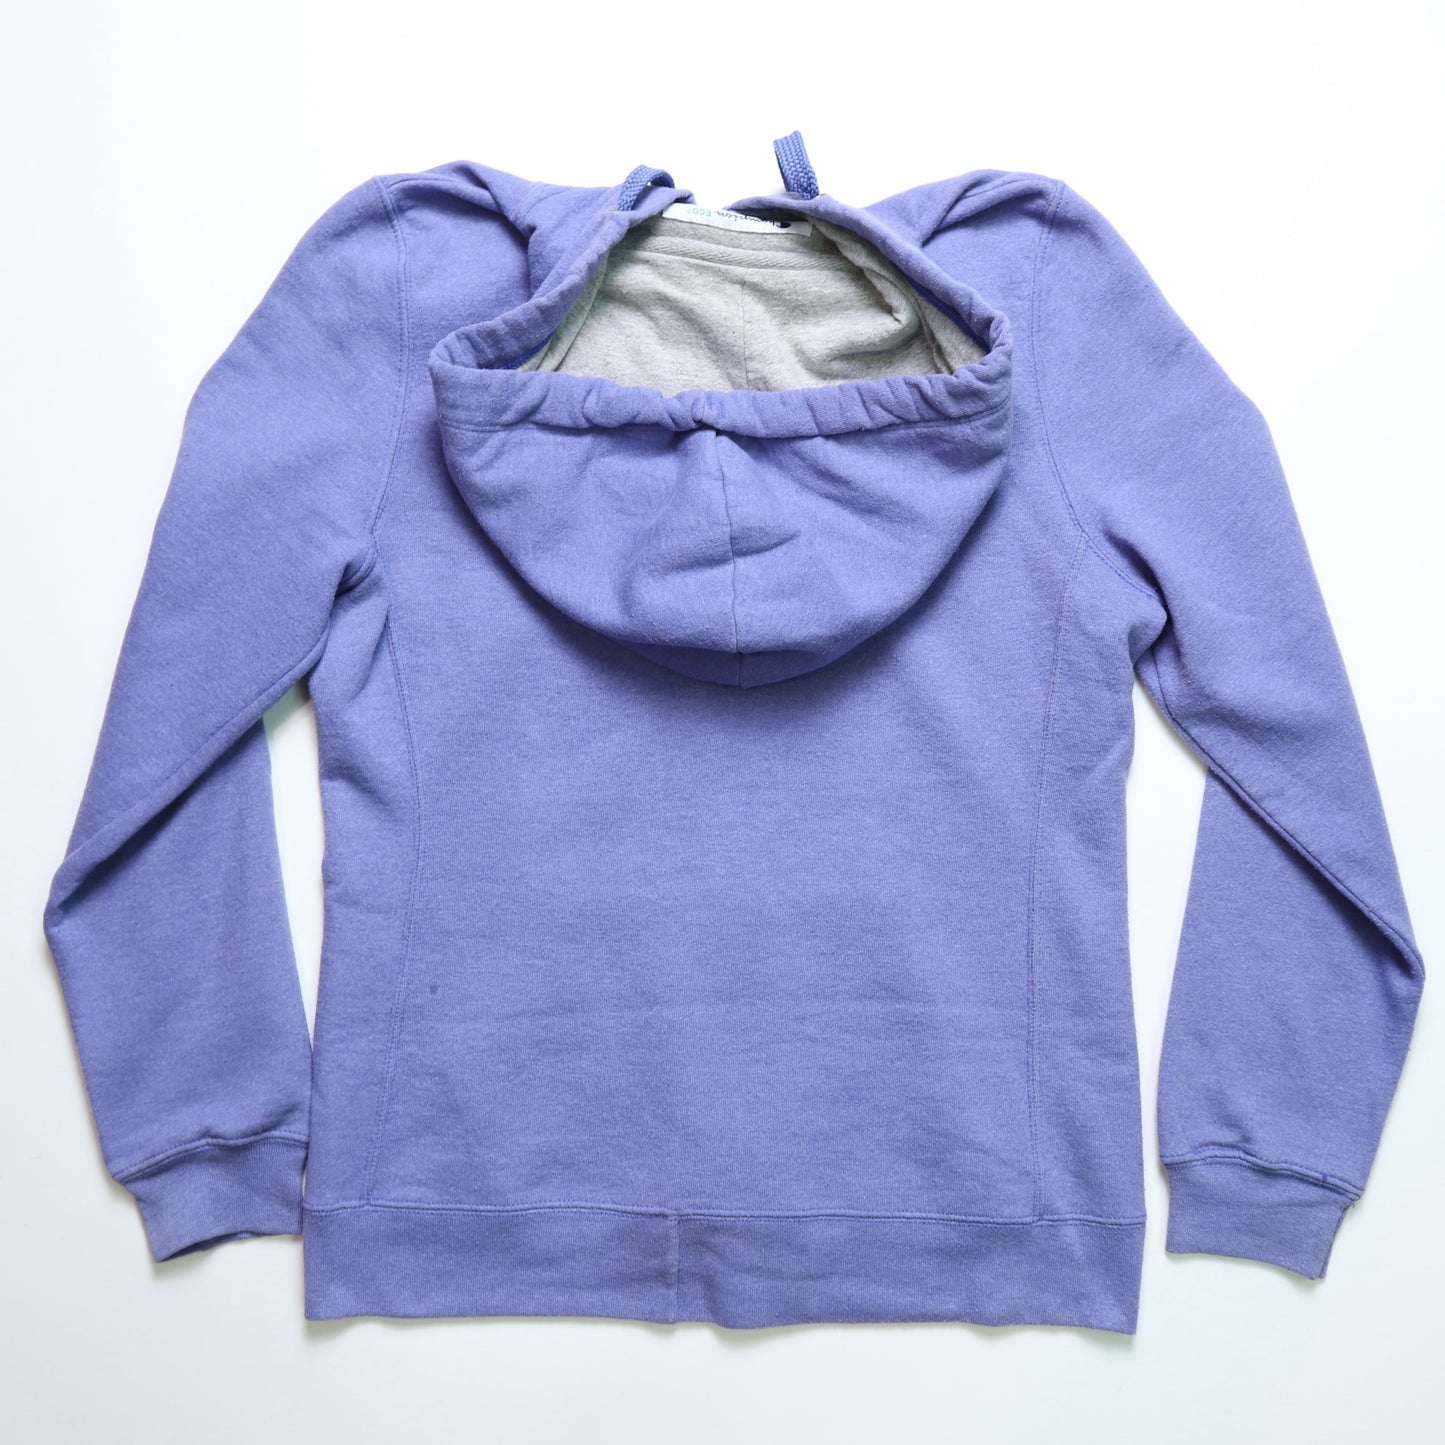 Champion Lilac Hooded Jacket